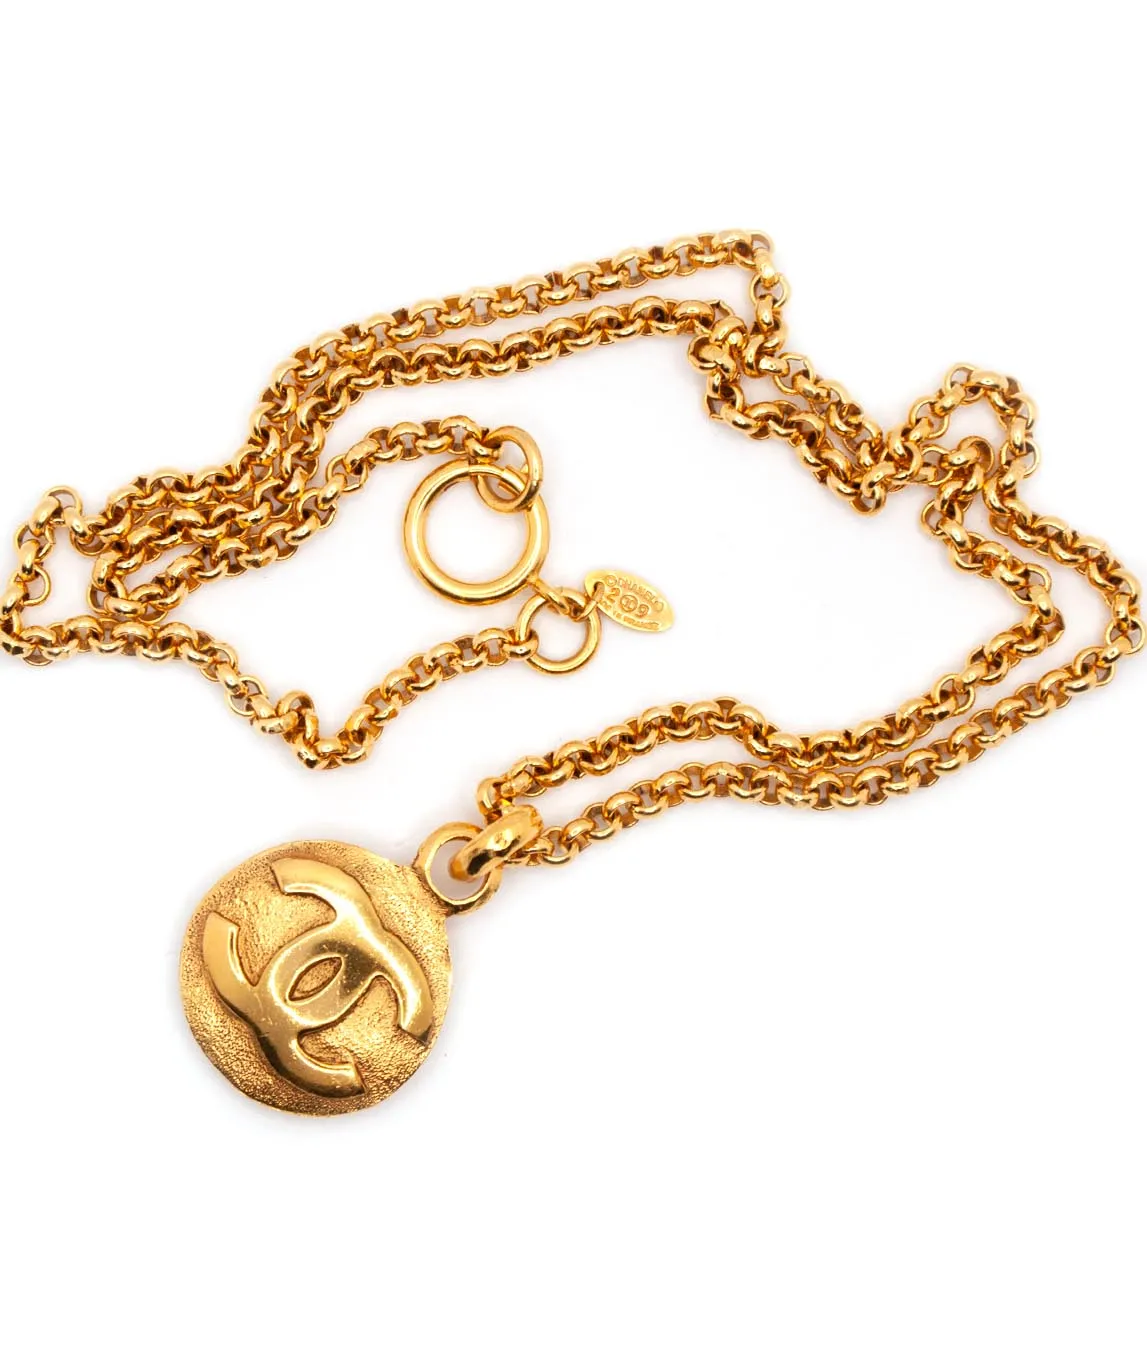 Vintage Chanel Logo Pendant on long chain necklace gold plated